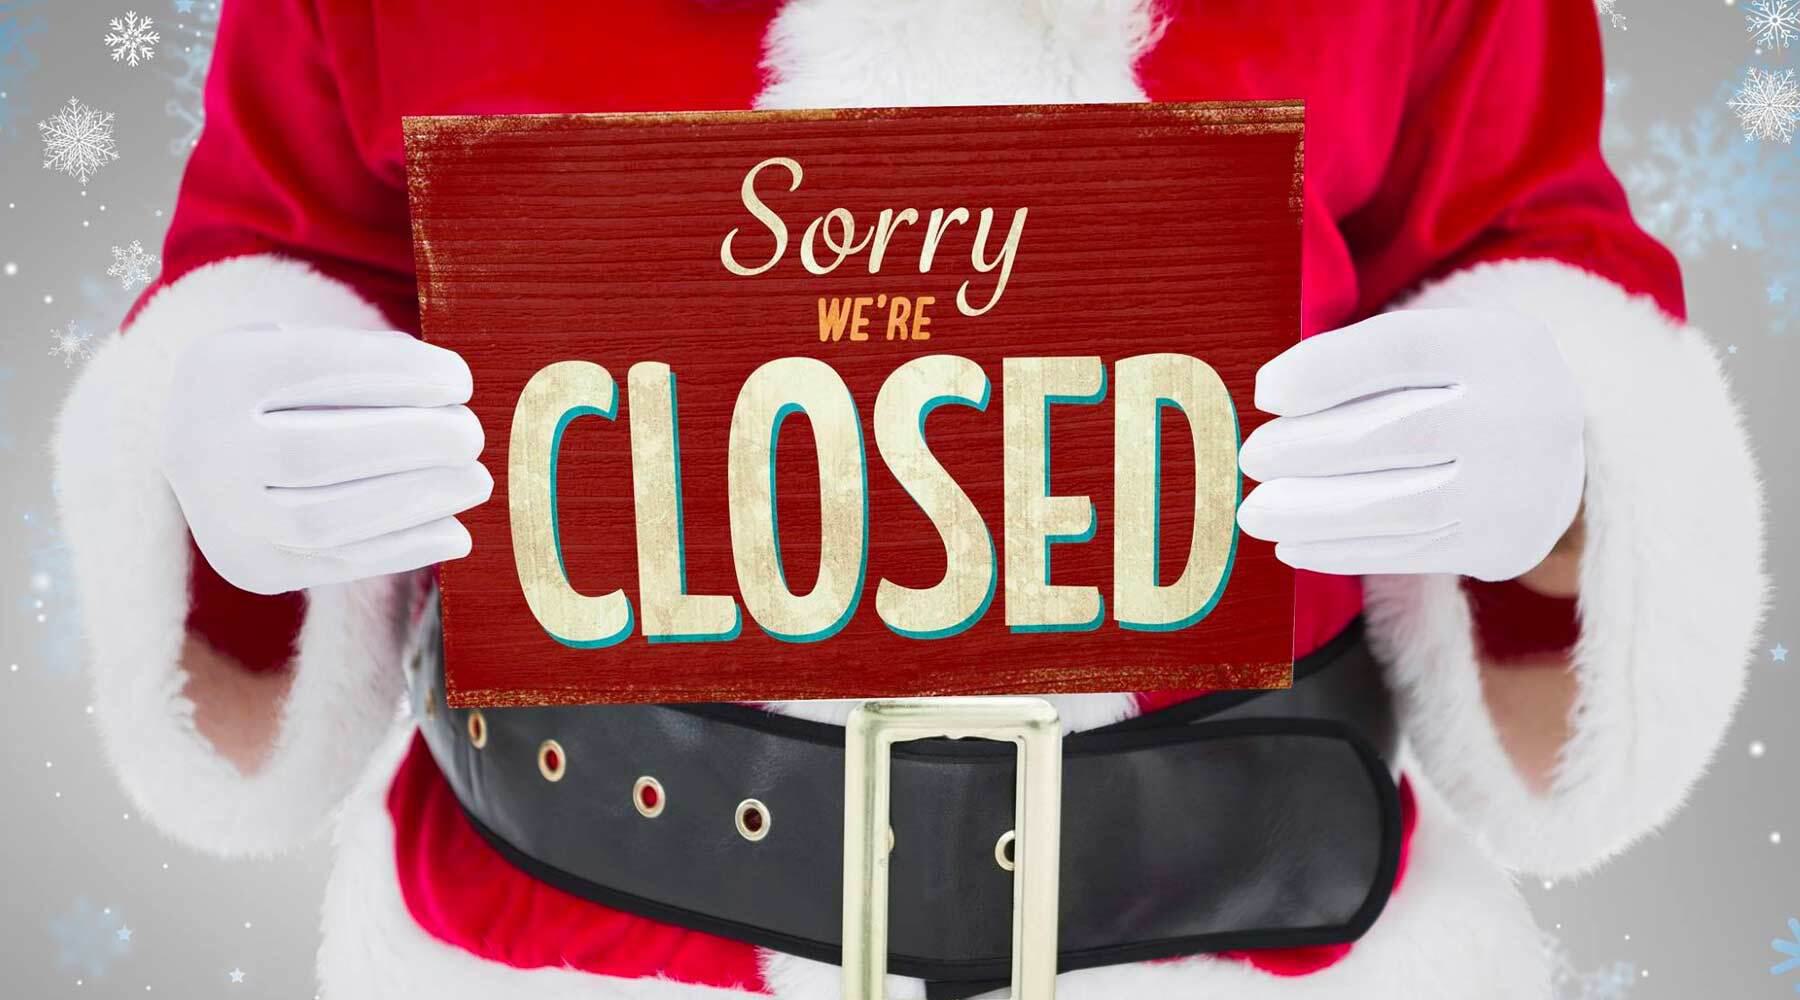 Closed for Christmas Decorative Image